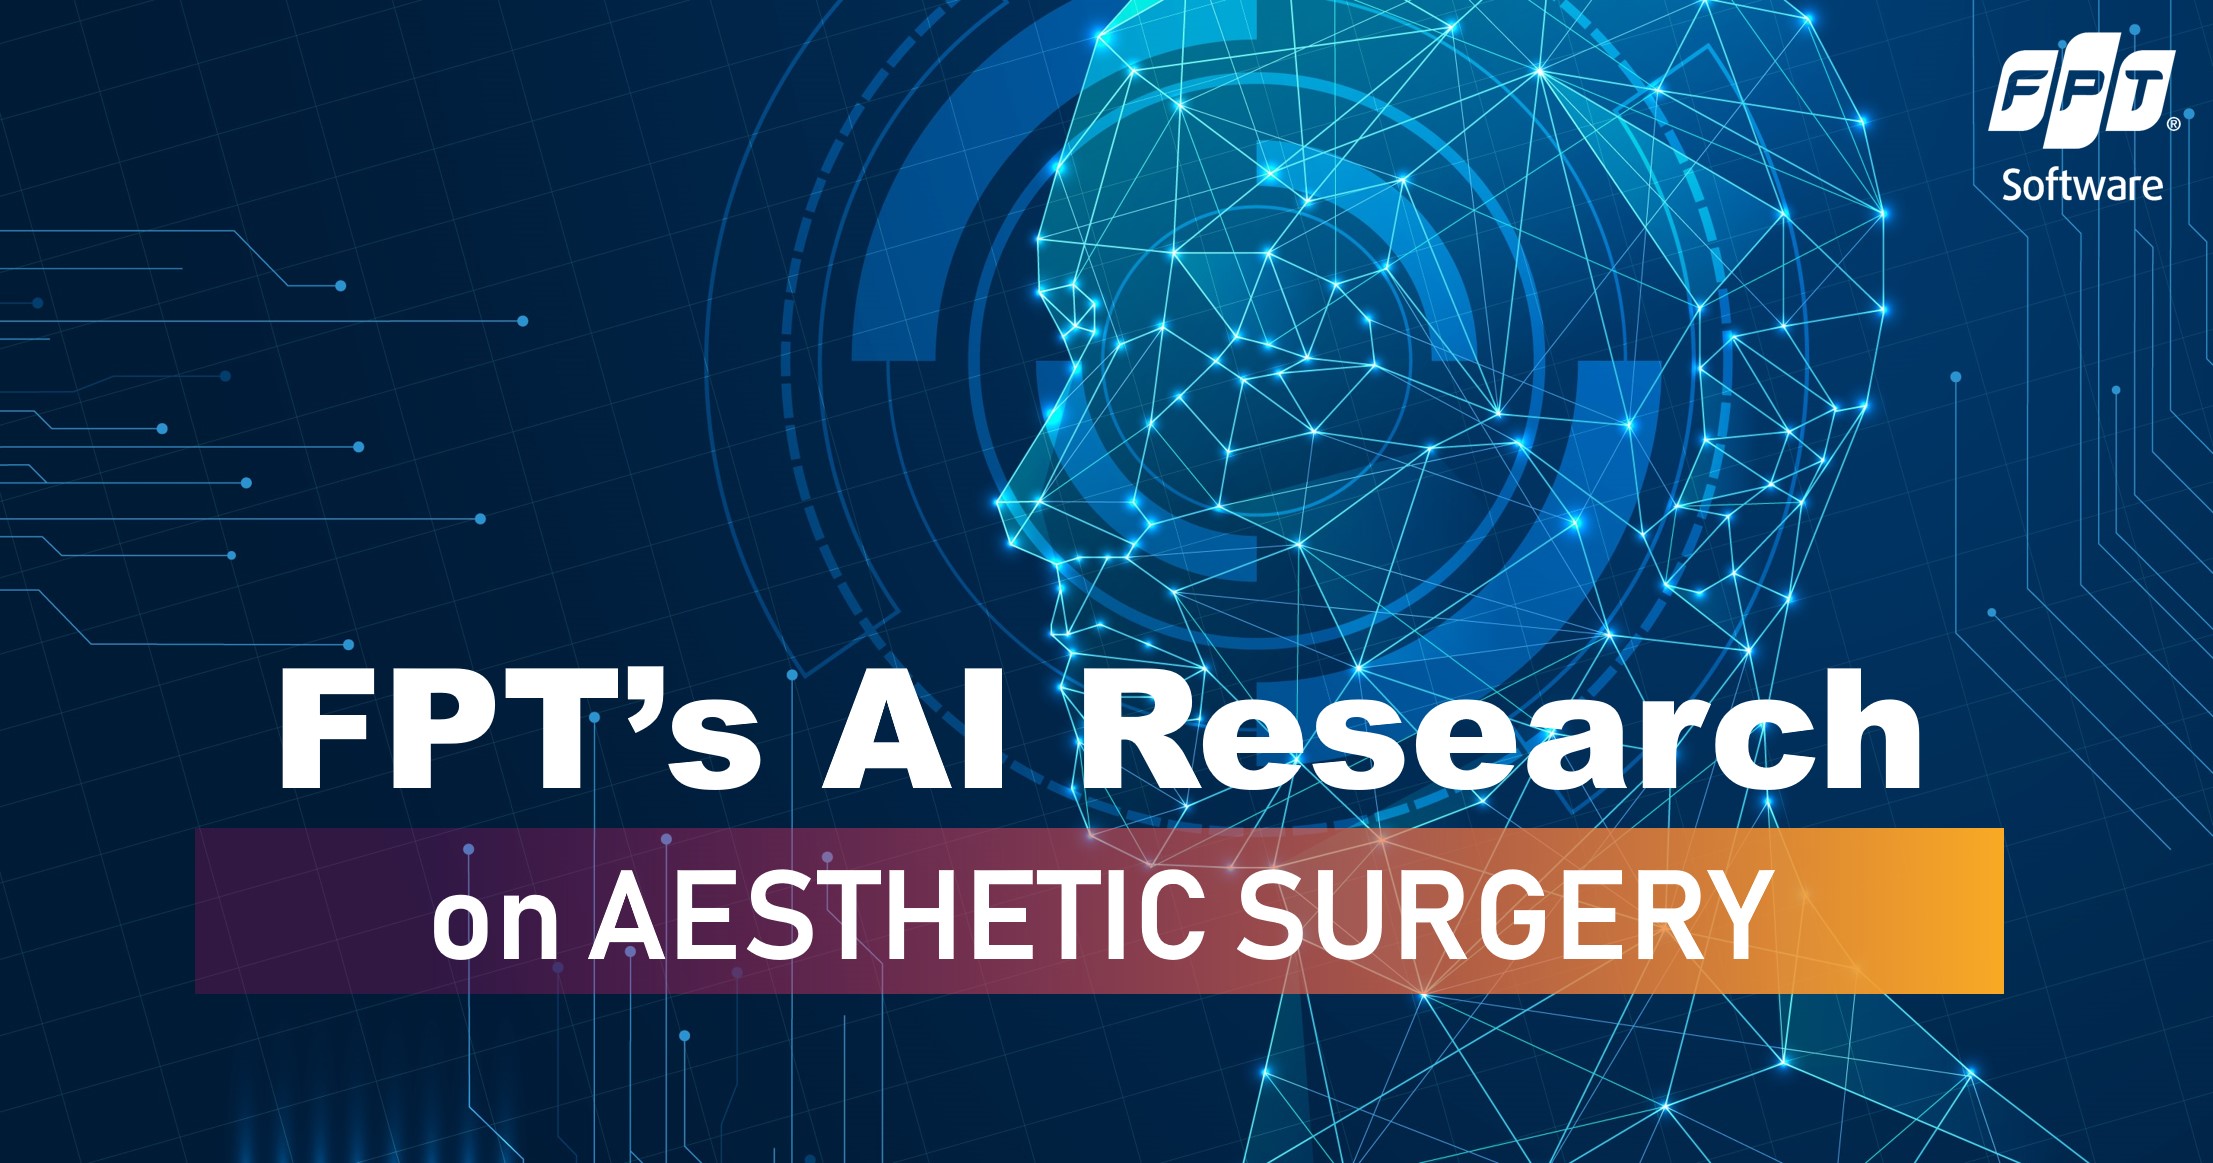 AI research on aesthetic surgery published